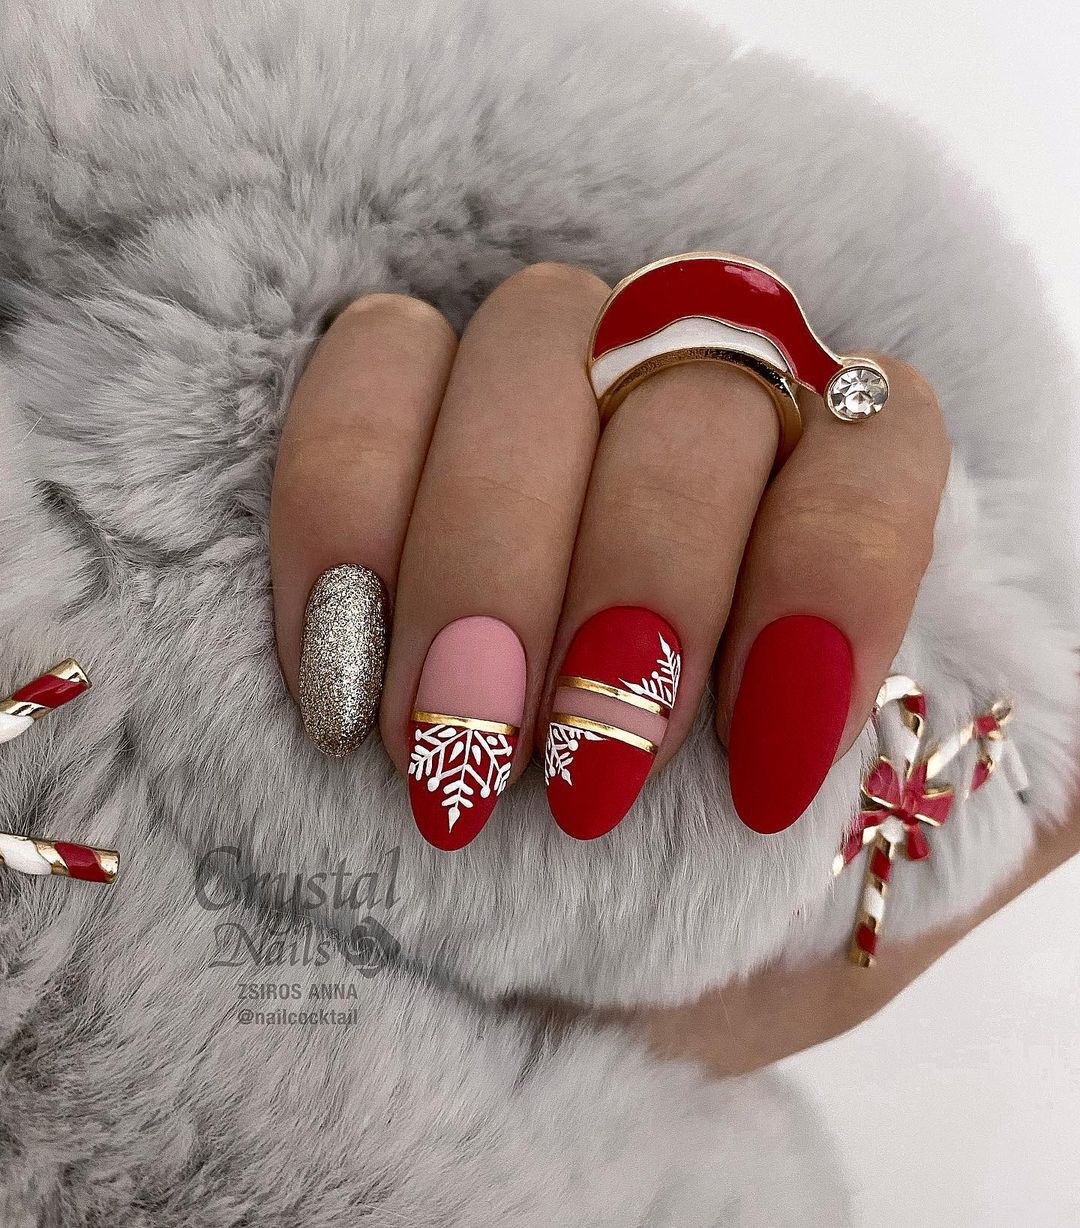 Red Matte Nails with Snowflakes and Silver Design